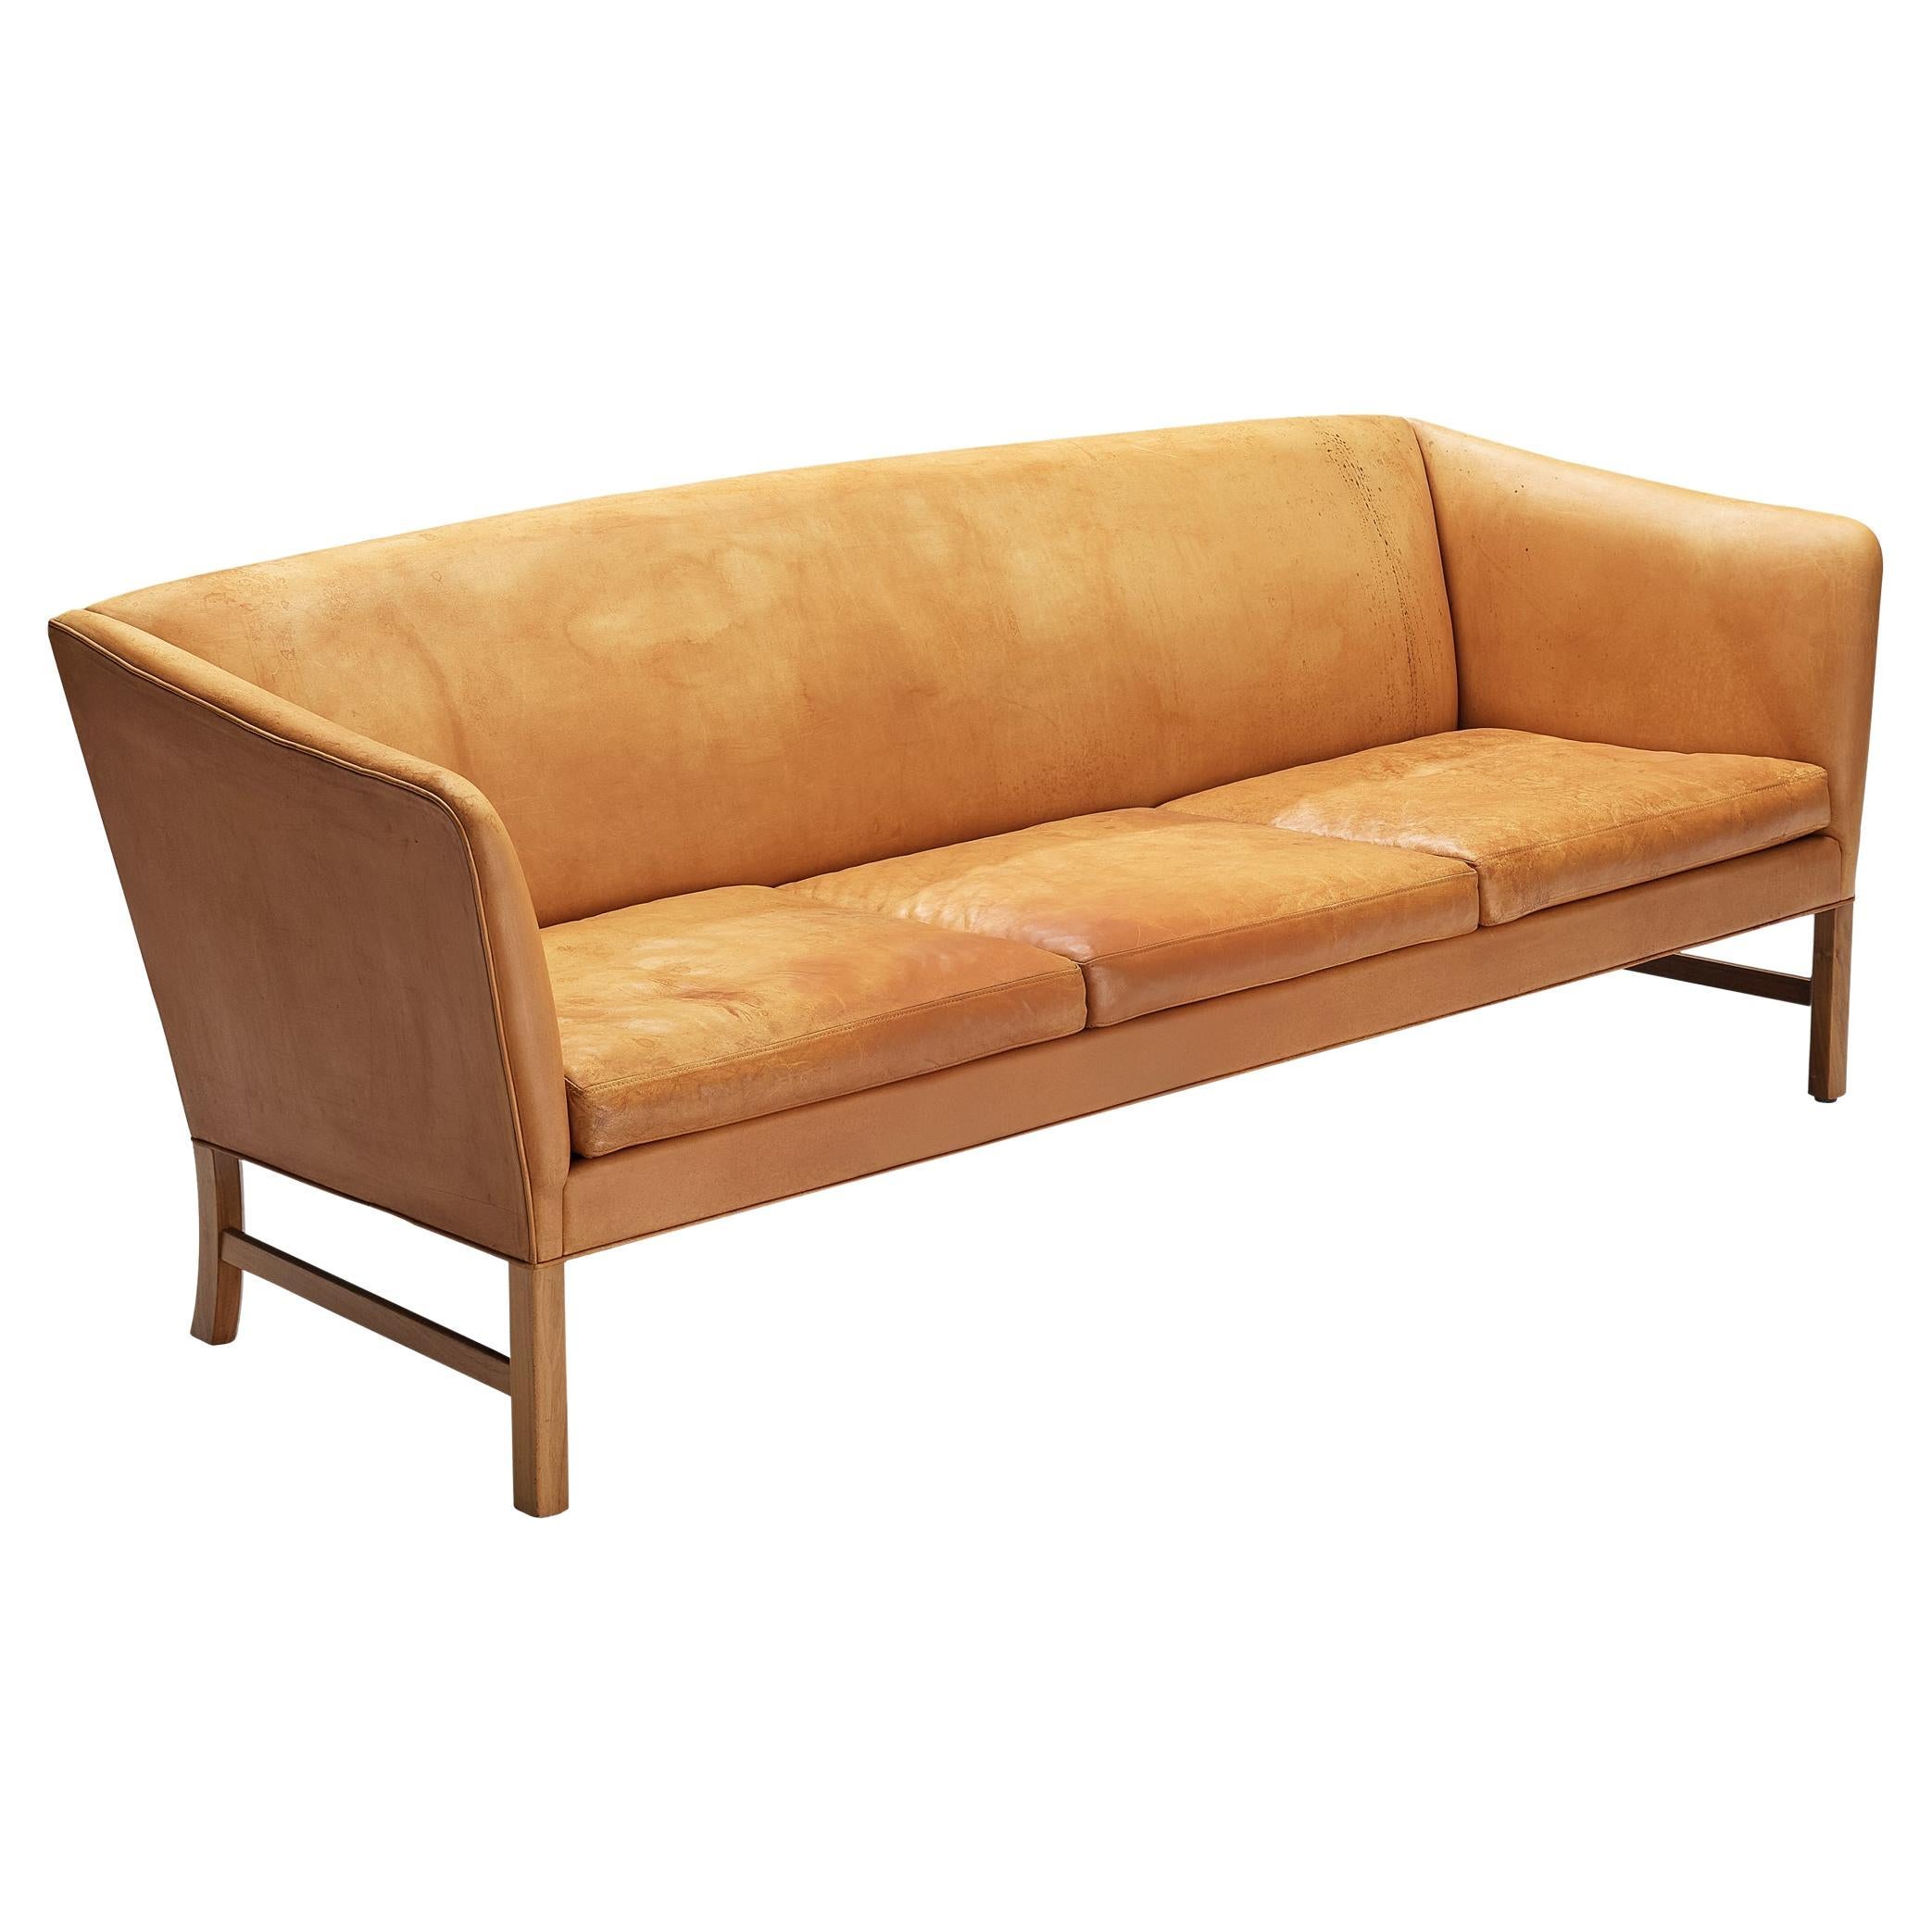 Ole Wanscher for A.J. Iverseren Sofa in Camel Leather and Walnut  For Sale